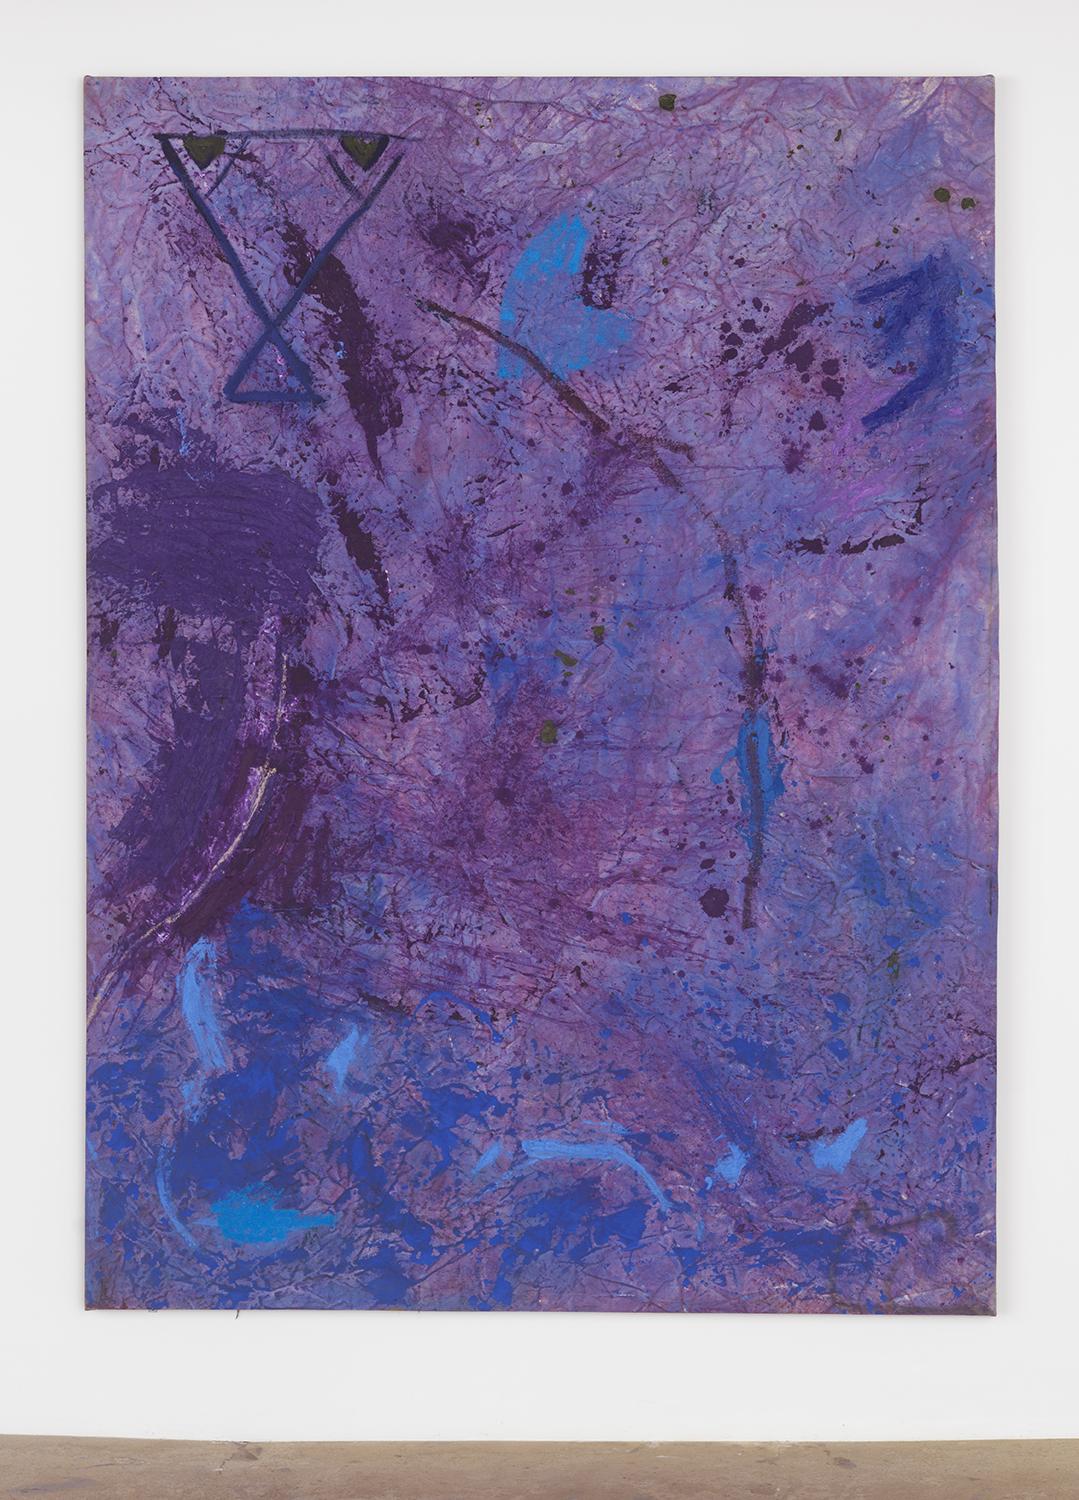 Bill Saylor, Zeroscape, 2017, oil, oil stick, flashe and dye on canvas, 84h x 62 x 1.5 in.